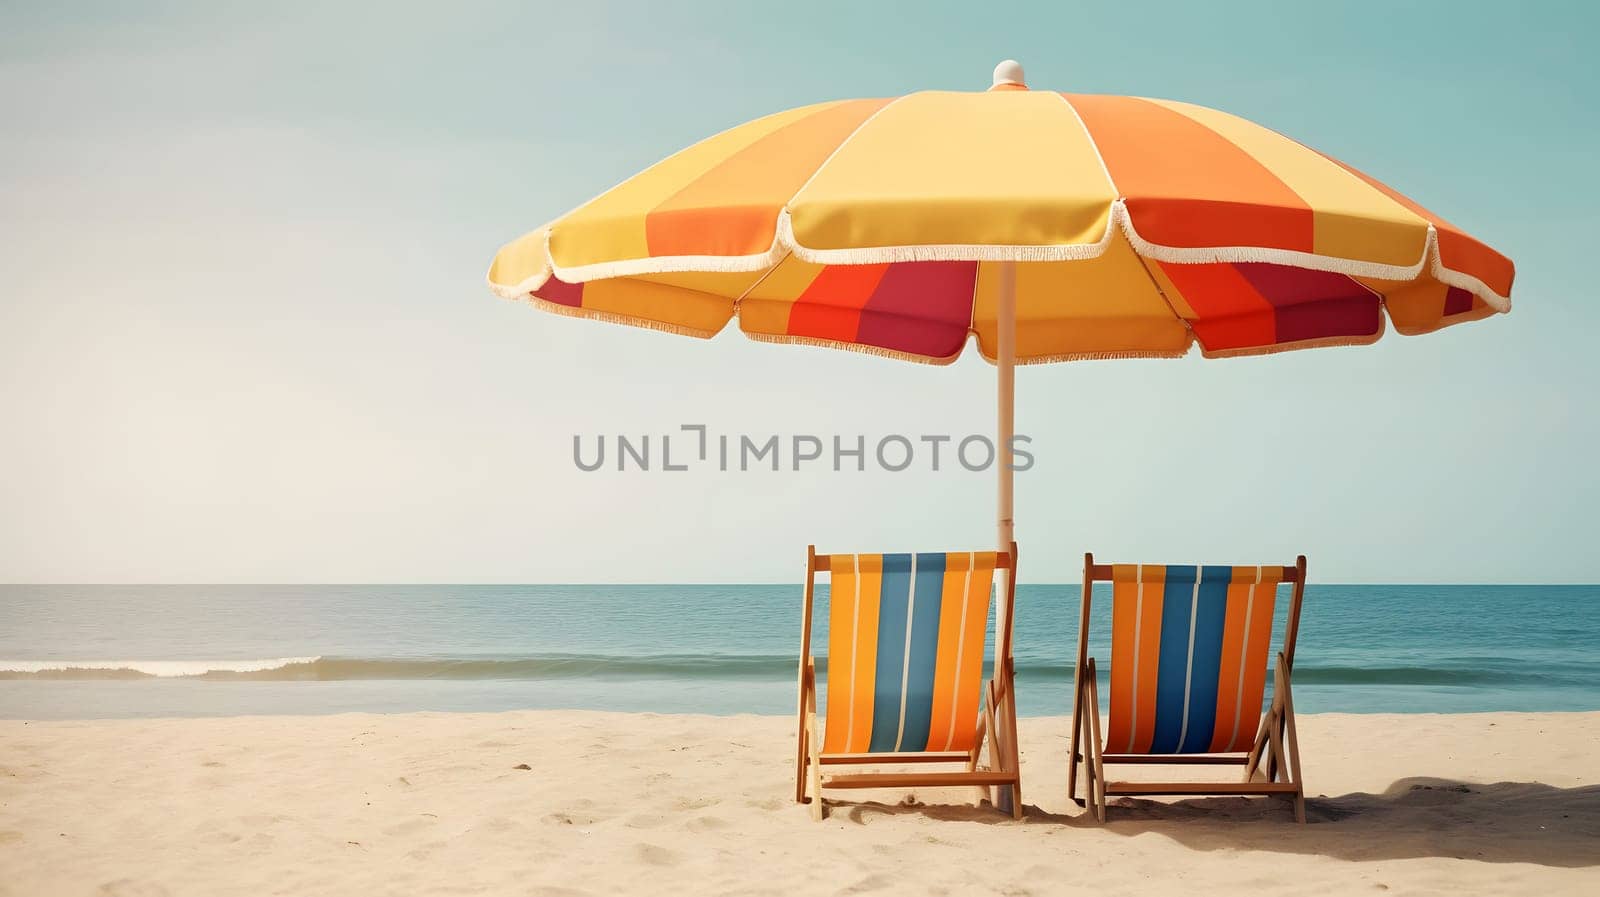 Beach umbrella with two chairs on the sand beach - summer vacation theme header. Neural network generated in May 2023. Not based on any actual person, scene or pattern.